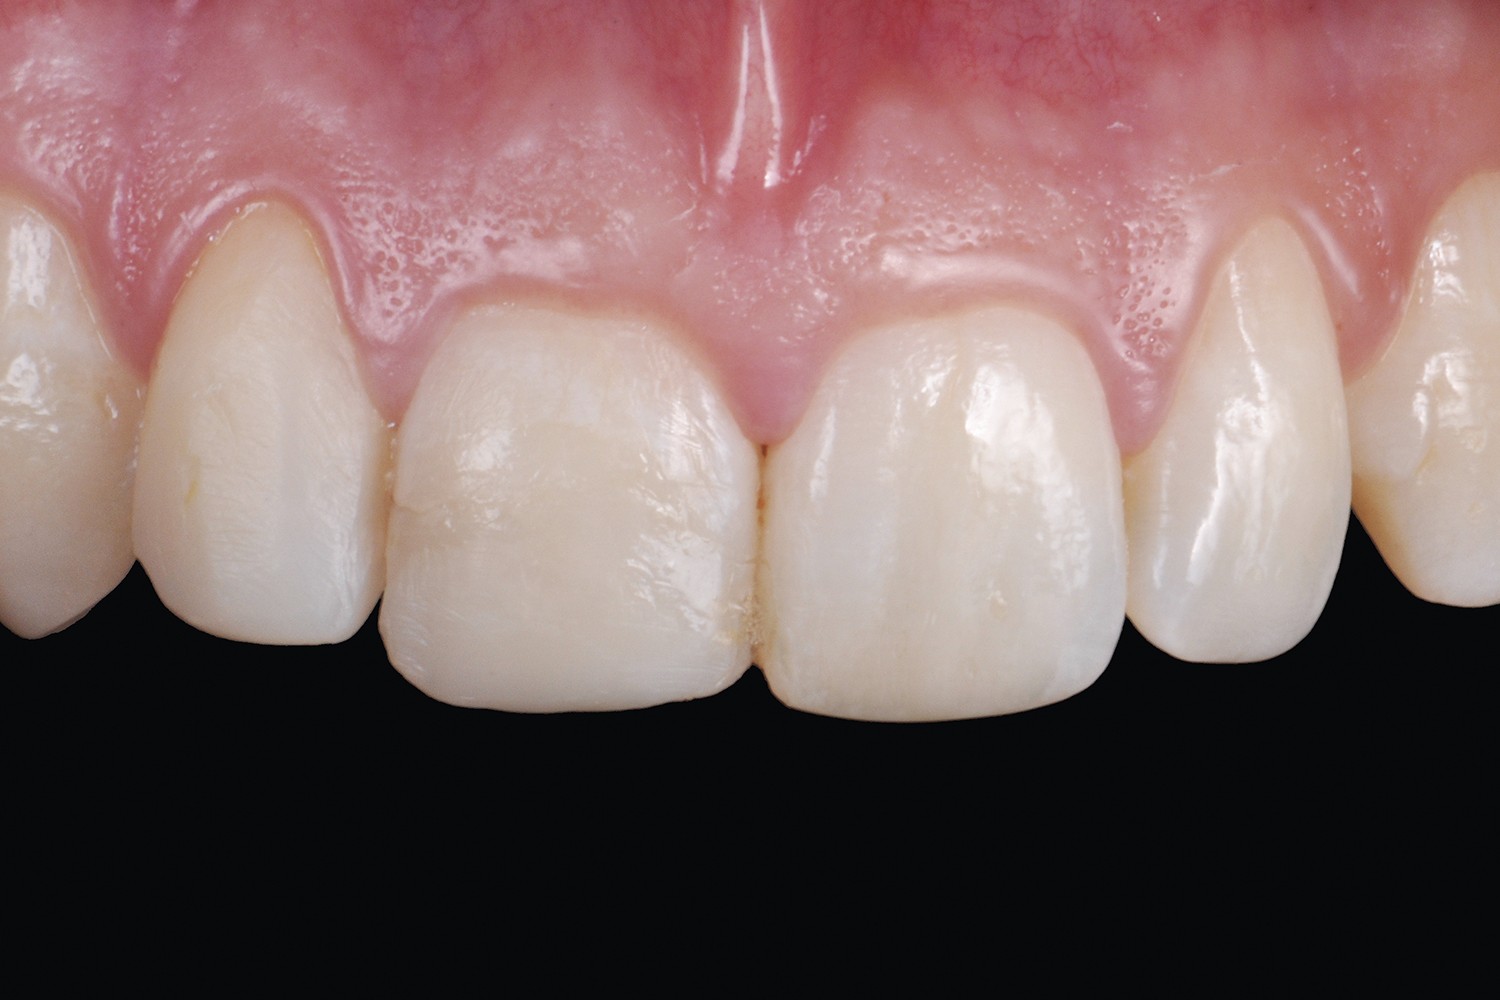 Anterior traumatic dental injuries: Ultra-conservative treatment